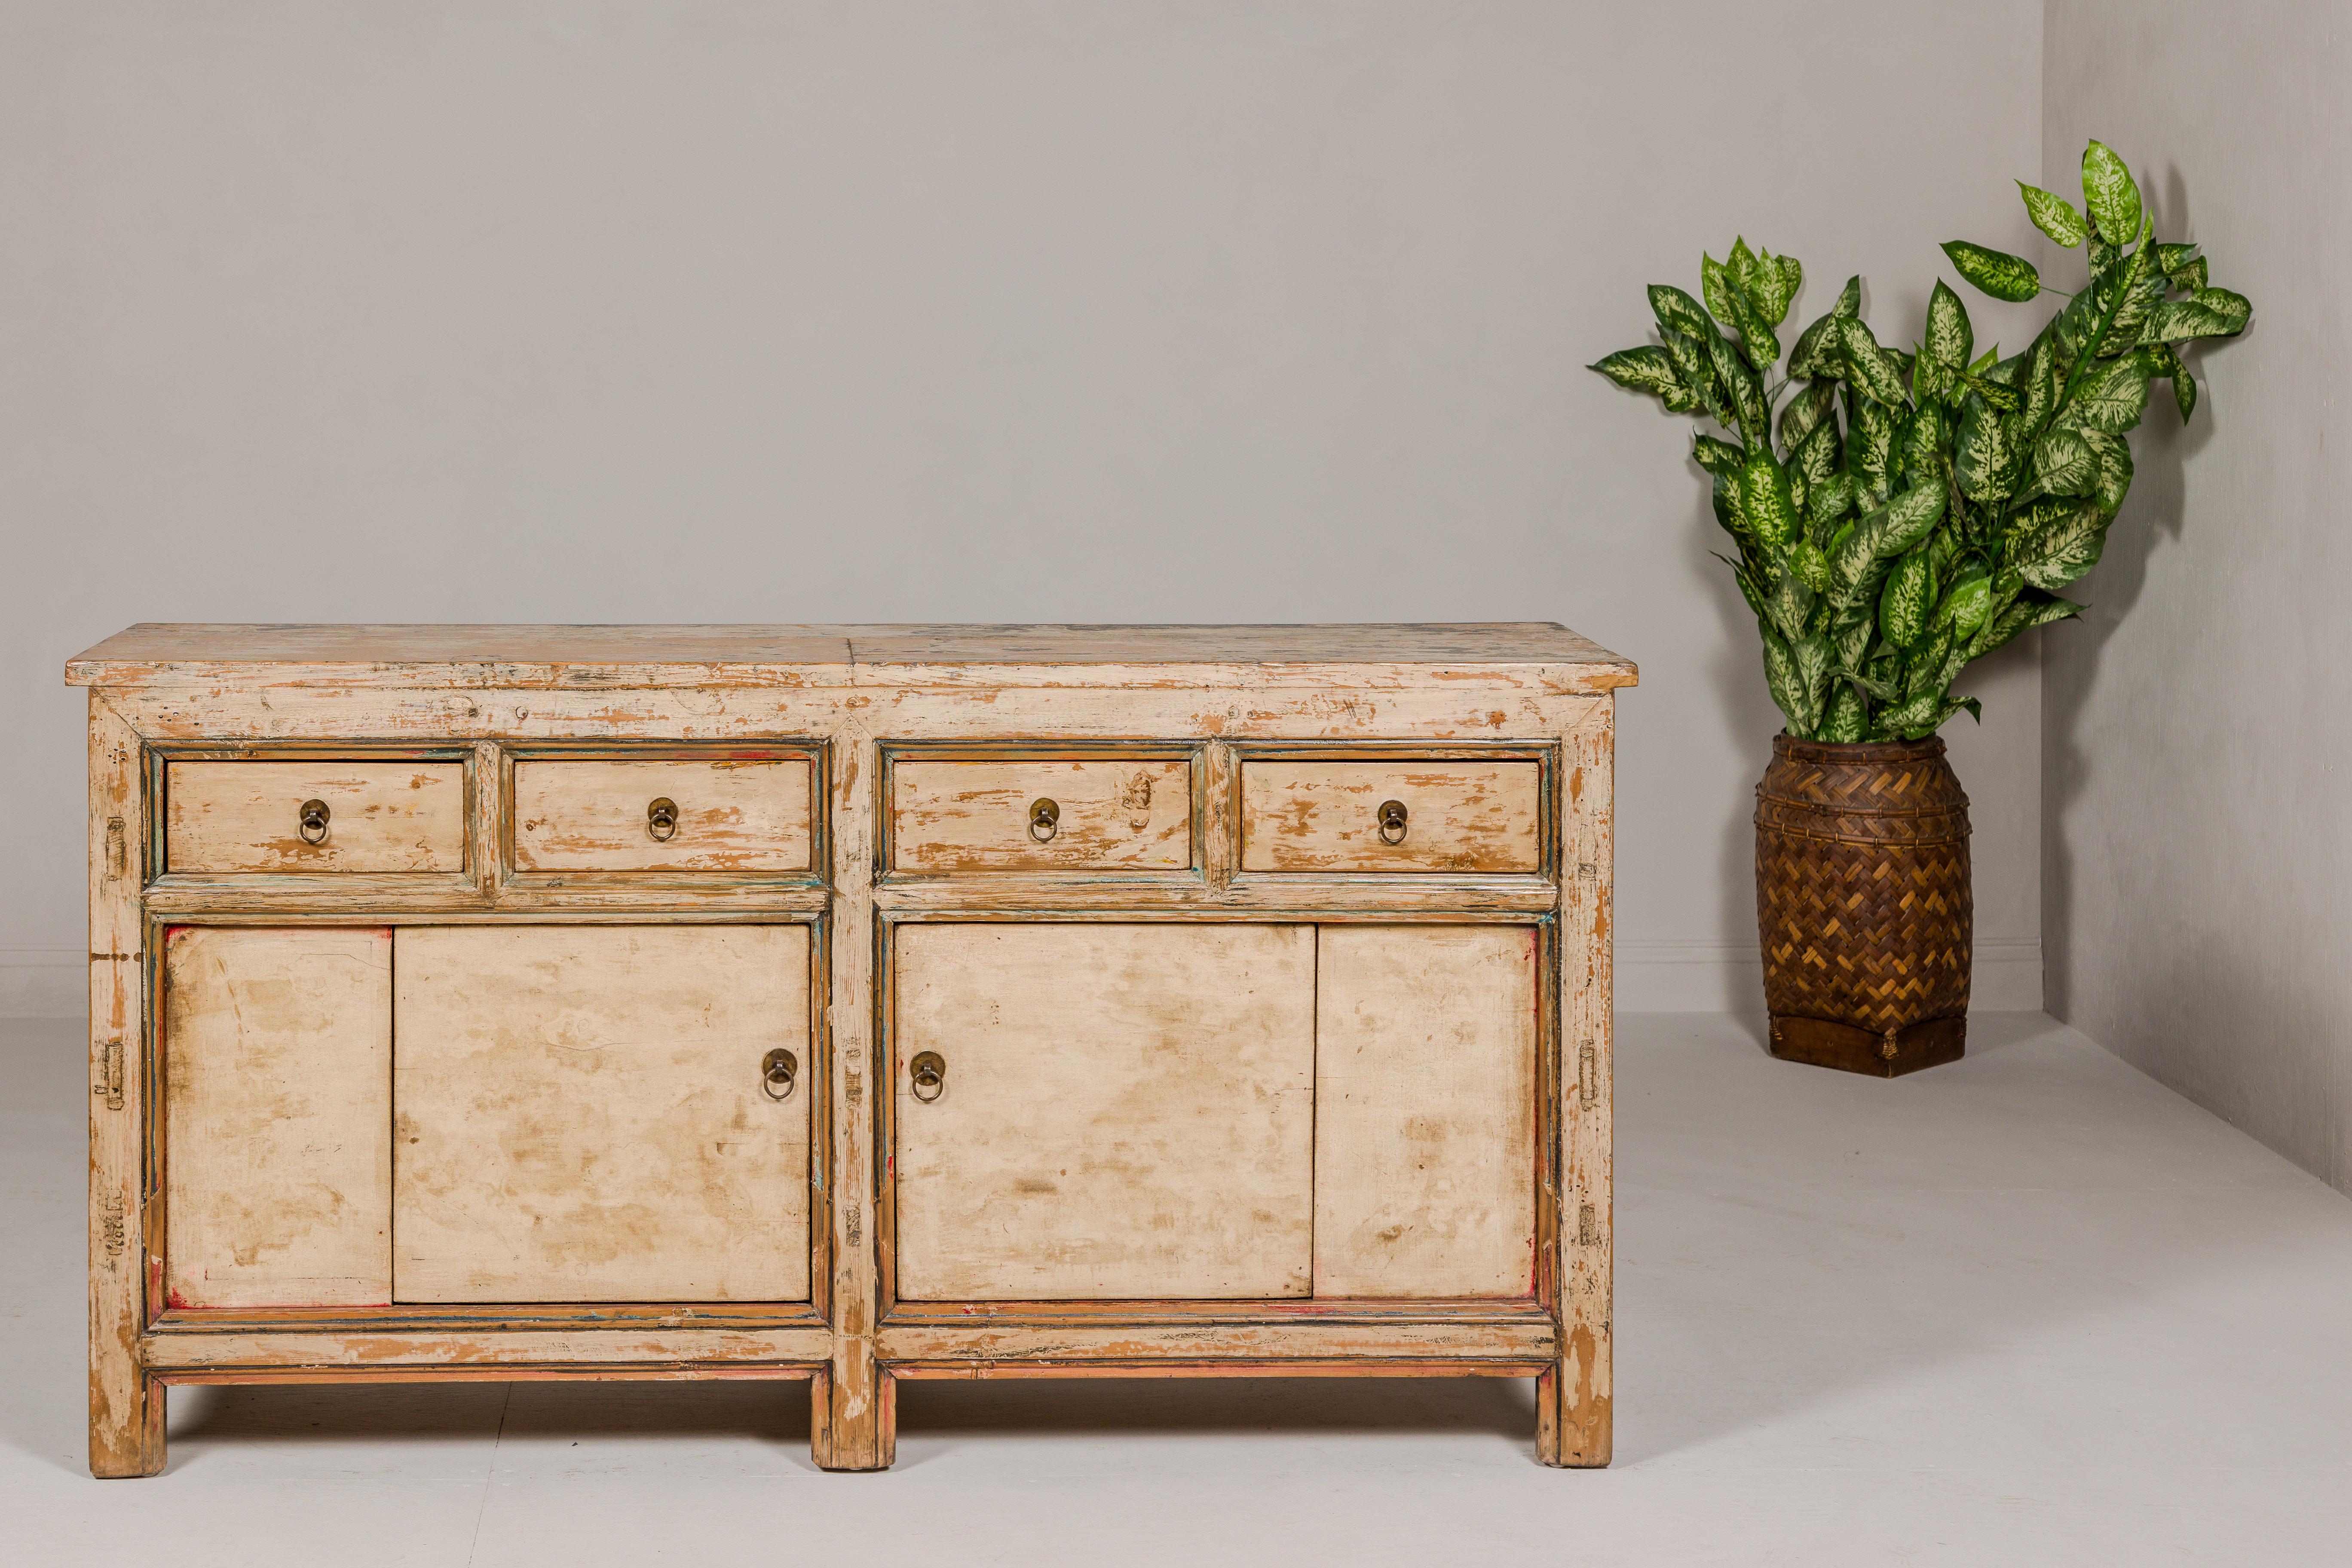 A painted elm rustic sideboard from the mid 20th century, with distressed finish, two doors and four drawers. This mid-20th-century painted elm rustic sideboard is a splendid blend of timeworn charm and elegant restoration. It boasts a distressed